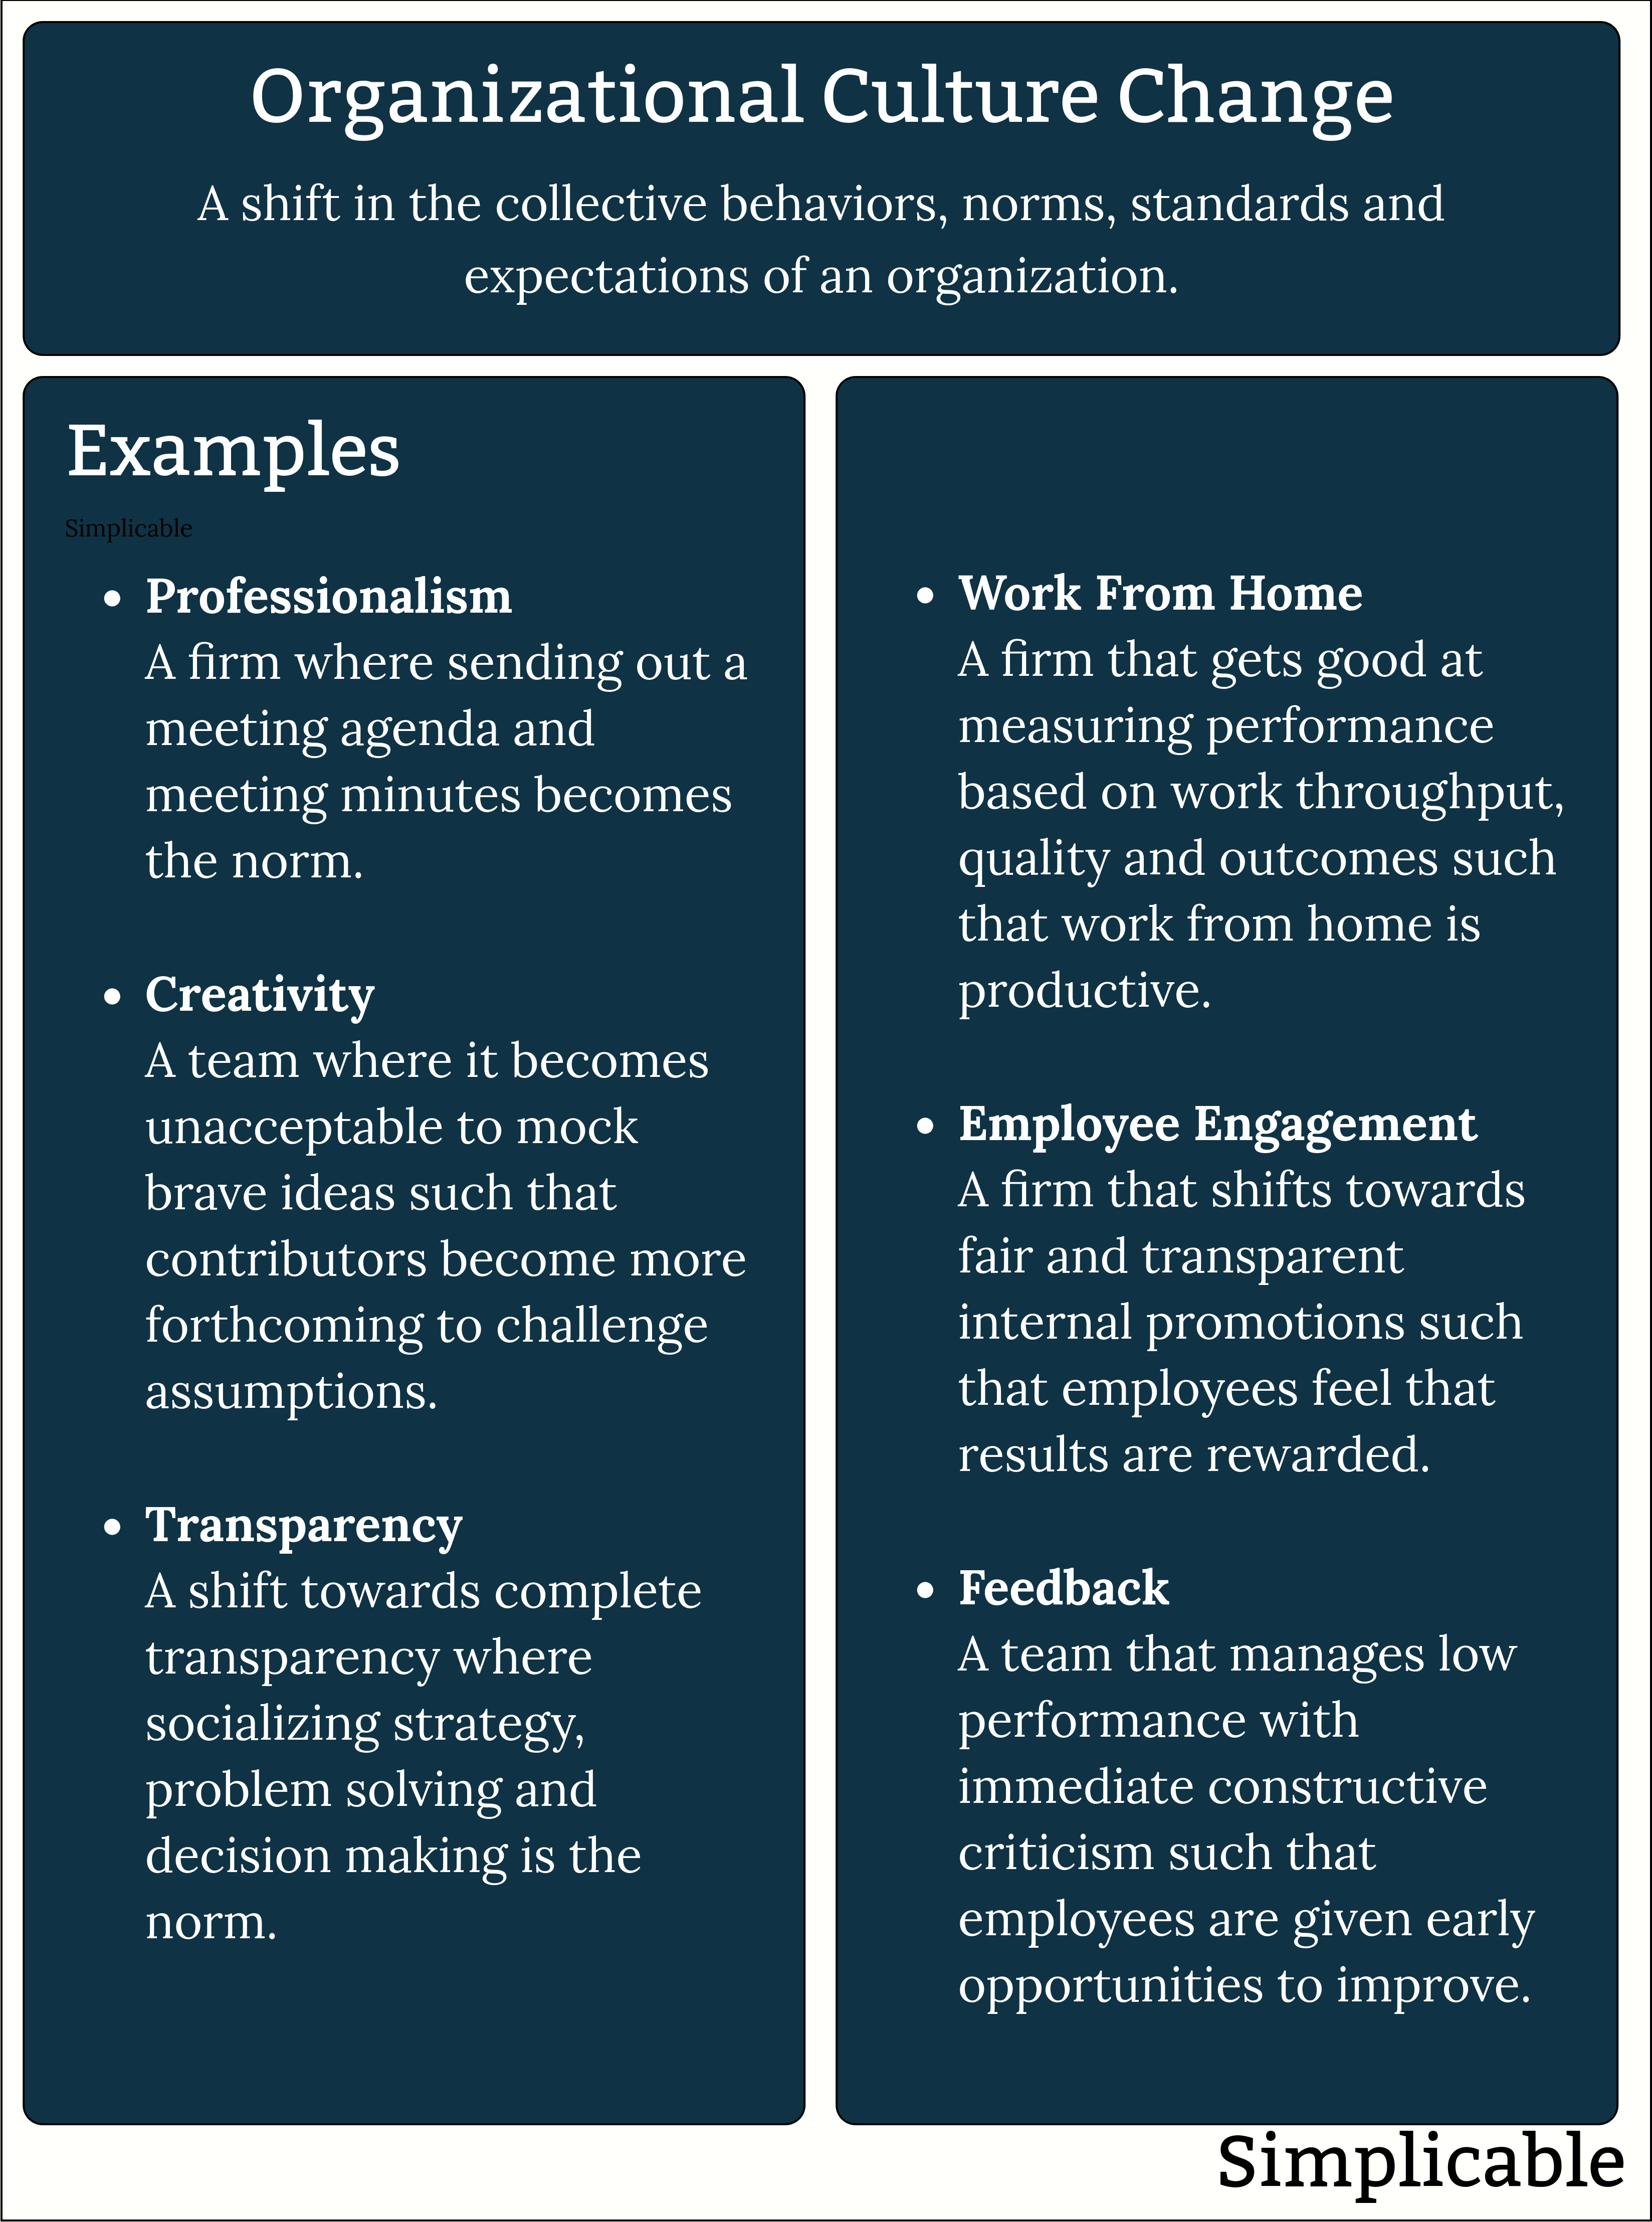 examples of organizational culture change